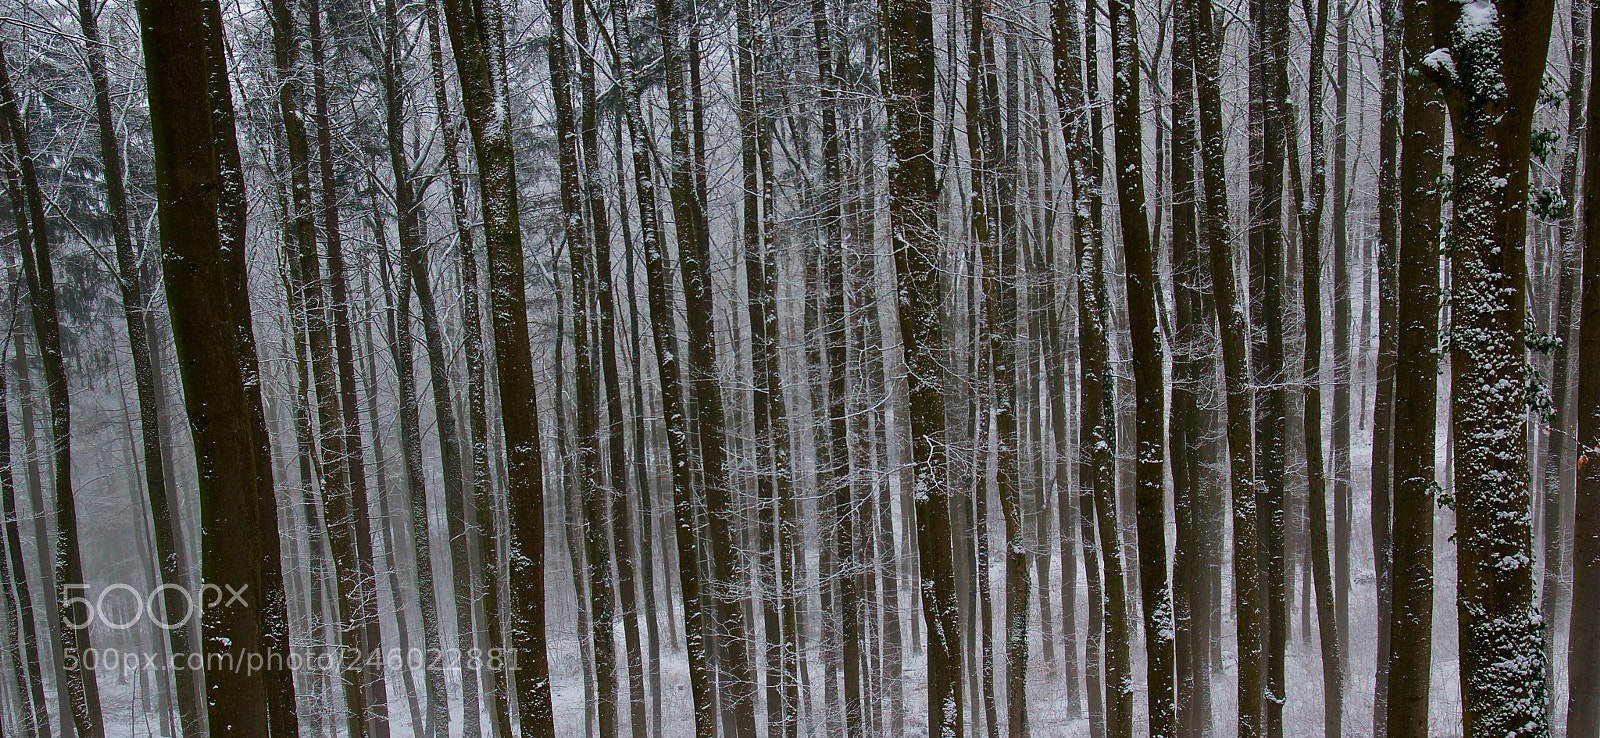 Pentax K-3 II sample photo. Winter forest photography